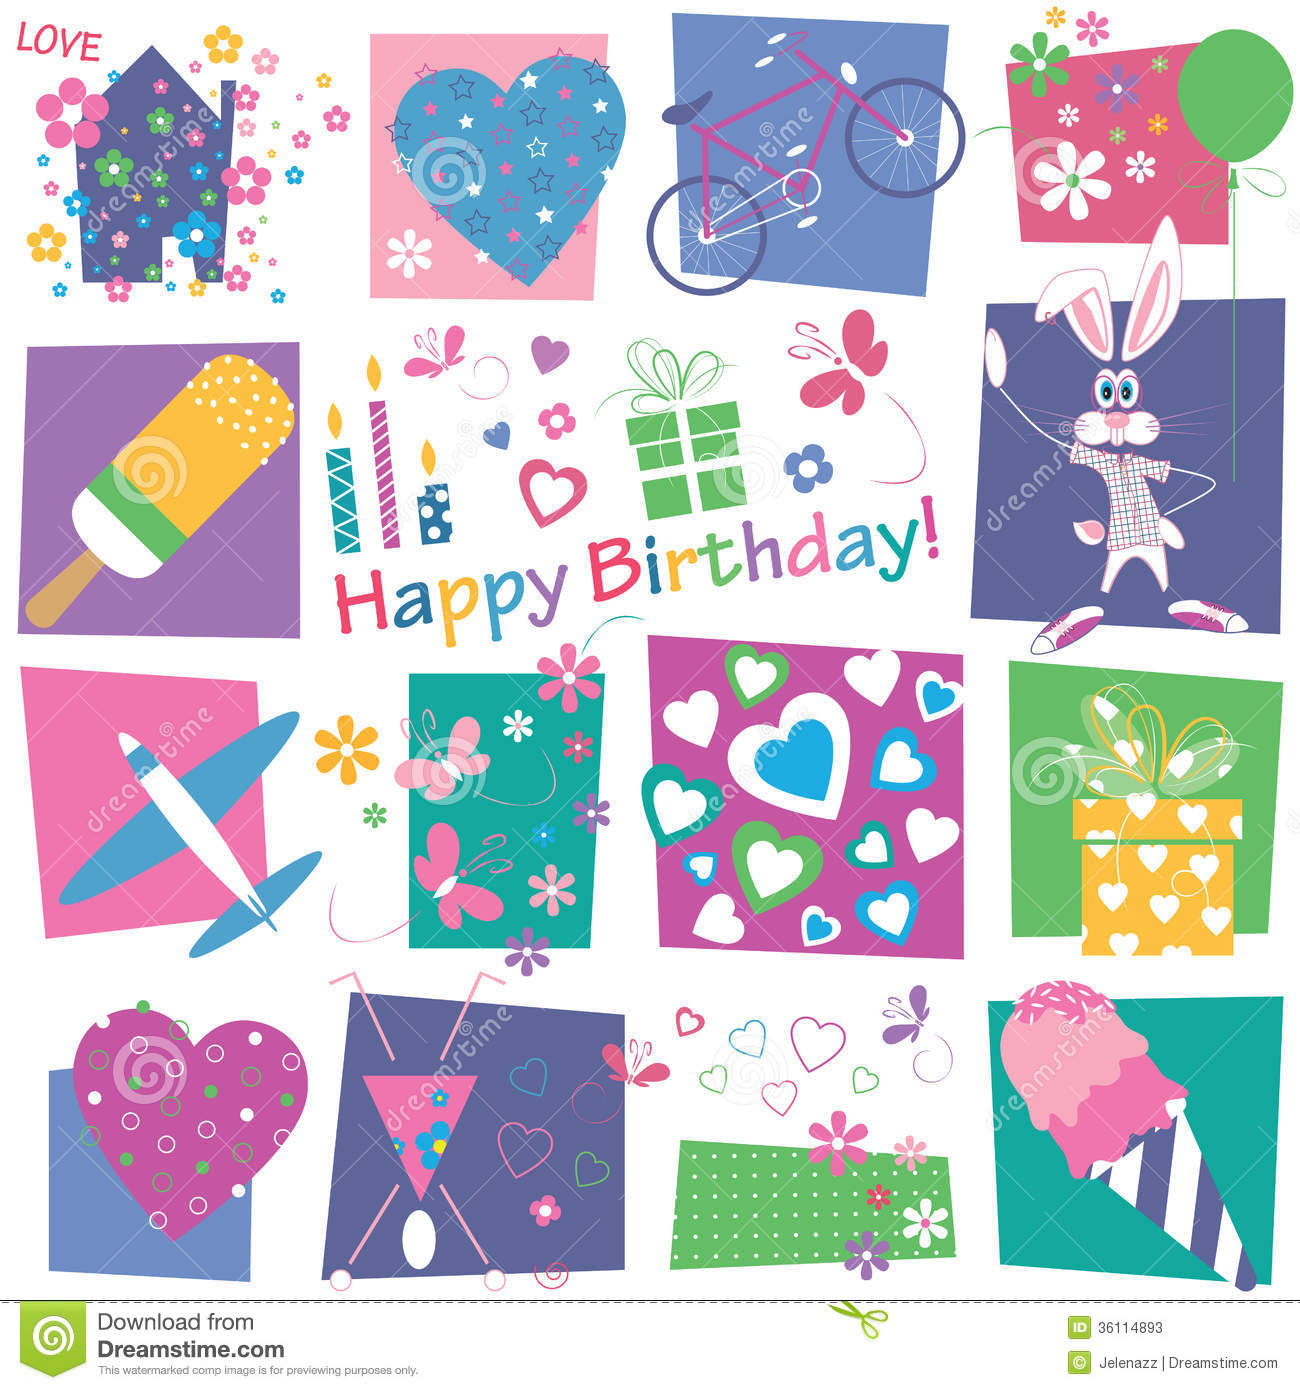 Hearts Flowers Butterflies Balloons Toys And Birthday Gifts Pattern On